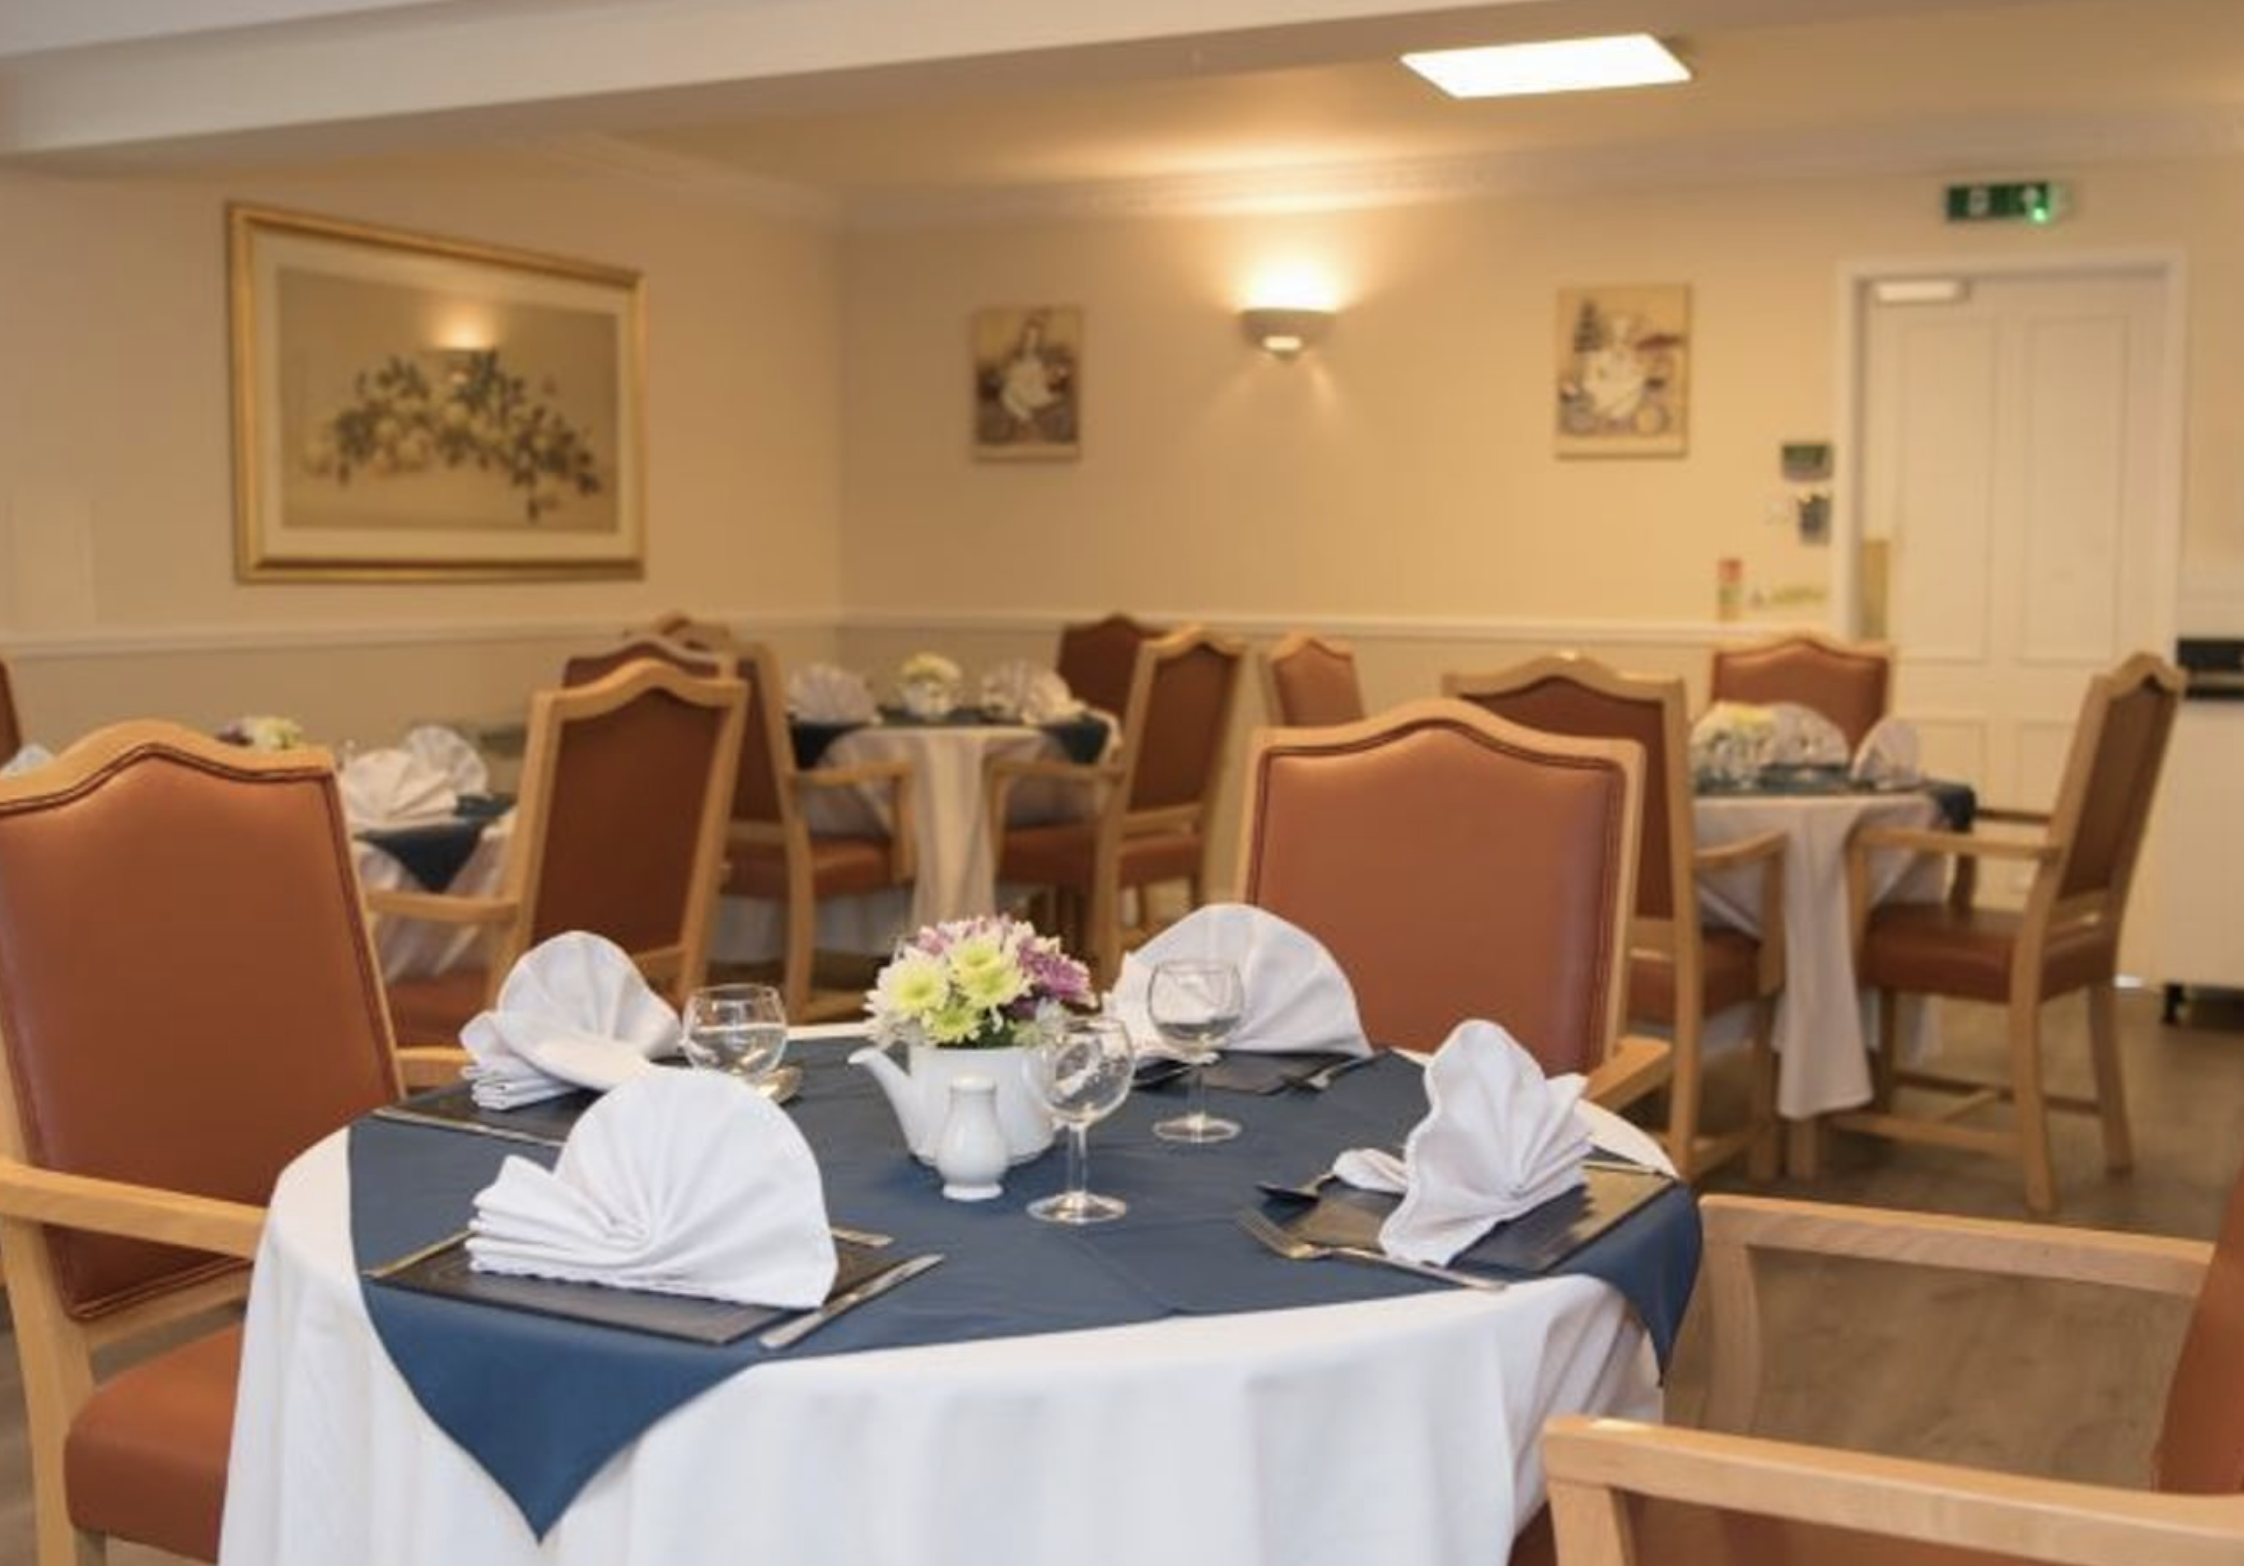 Dining room of Brooklyn House care home in Attleborough, Norfolk